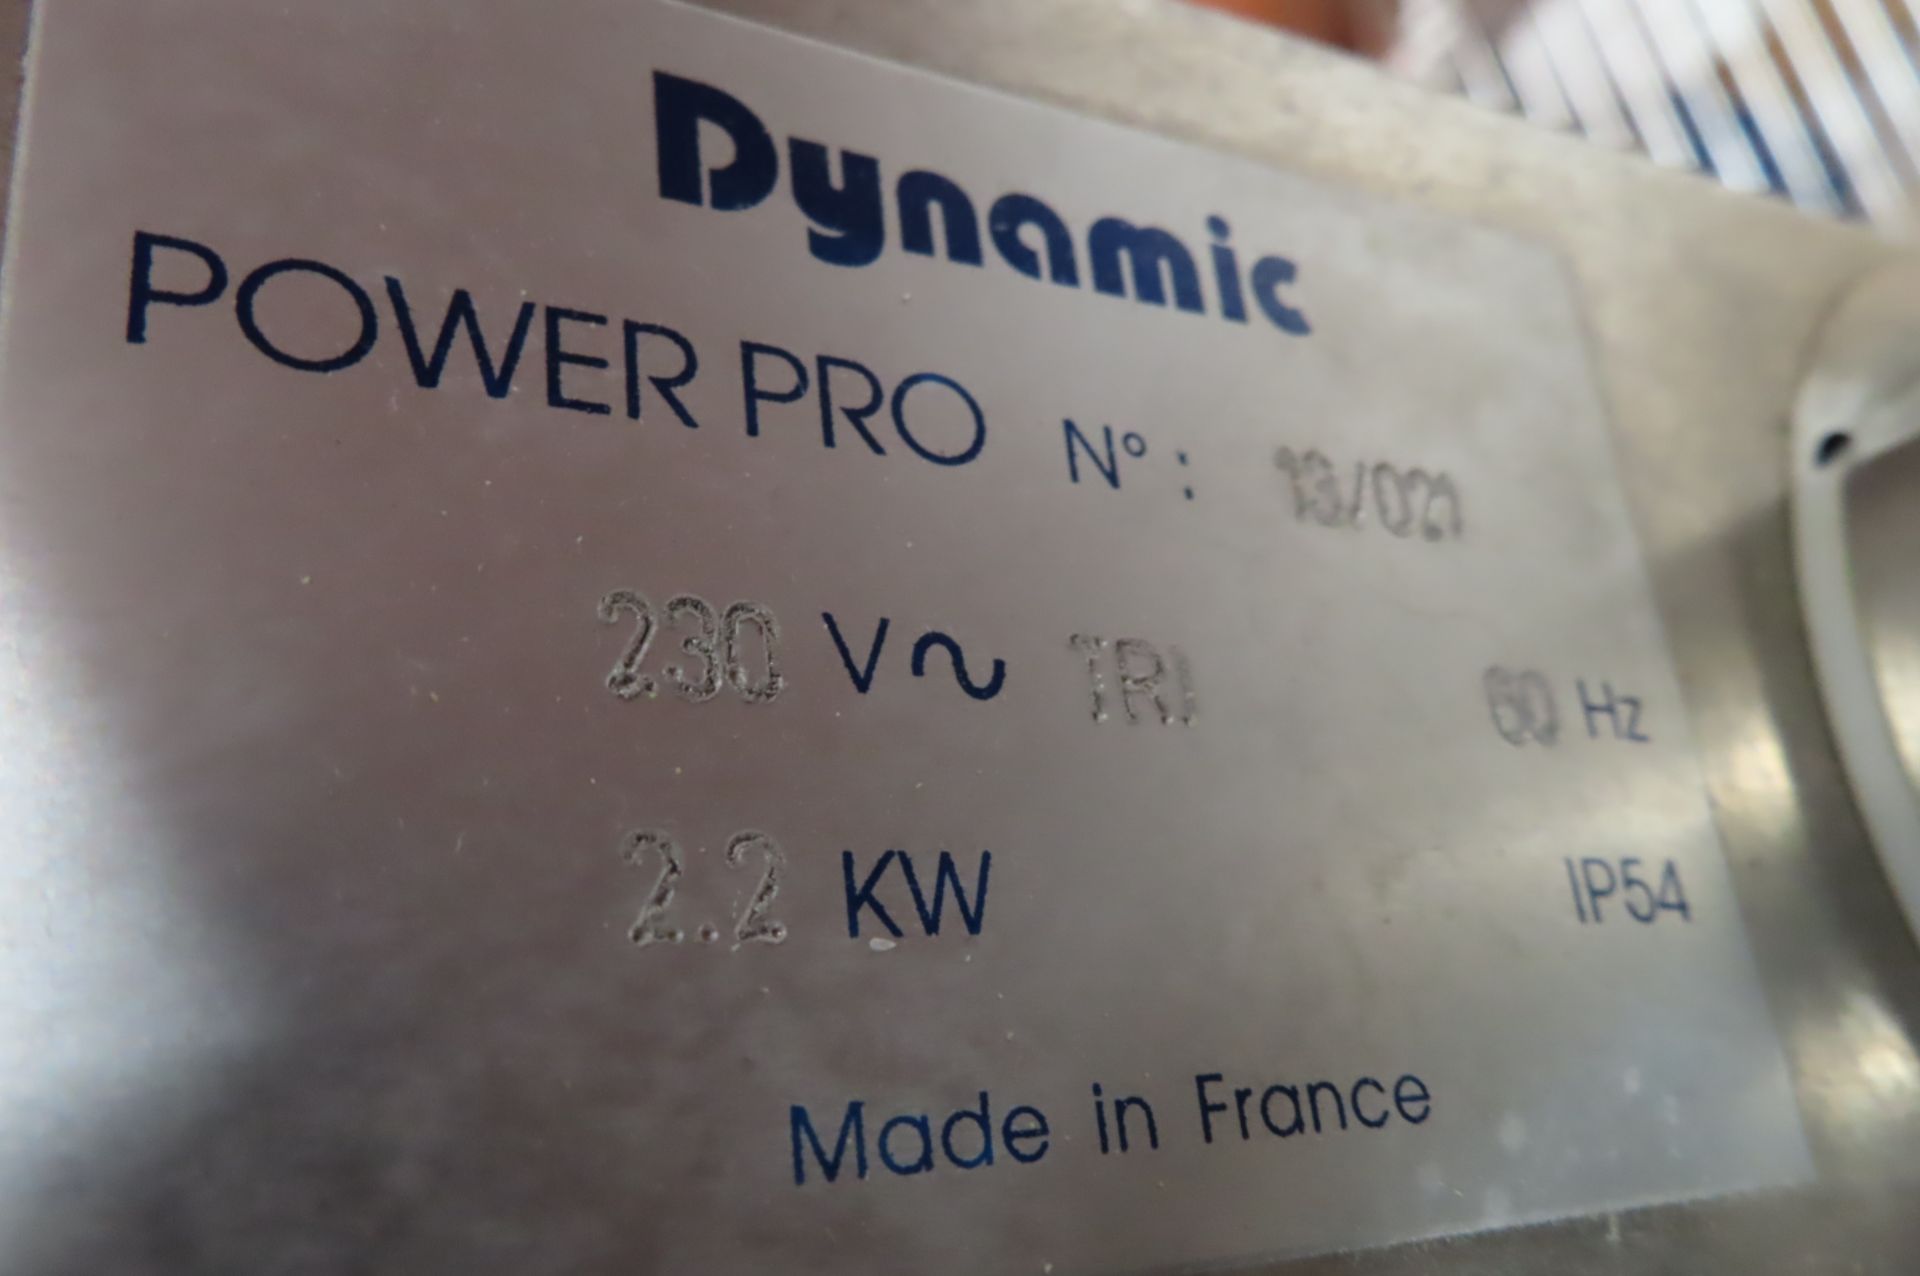 DYNAMIC POWER PRO MIXER, S/N .62 - Image 2 of 2